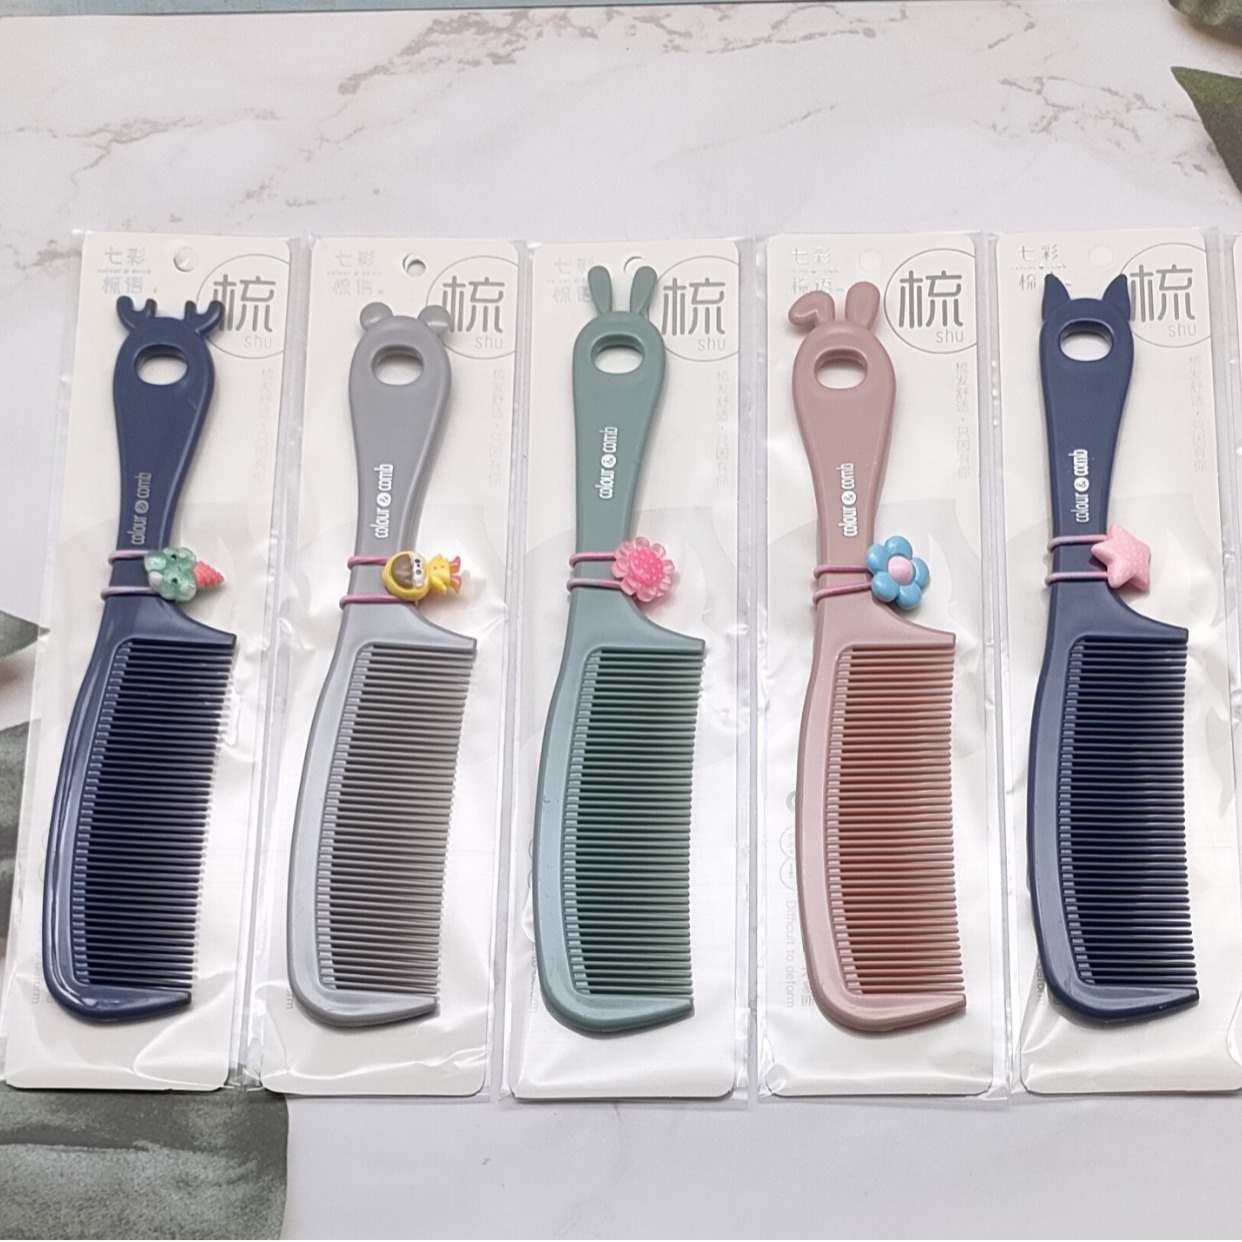 Small Rubber Band Hair Rope Hair Comb New Trendy Cartoon Cute Plastic Comb with Holes Portable Home Daily Comb